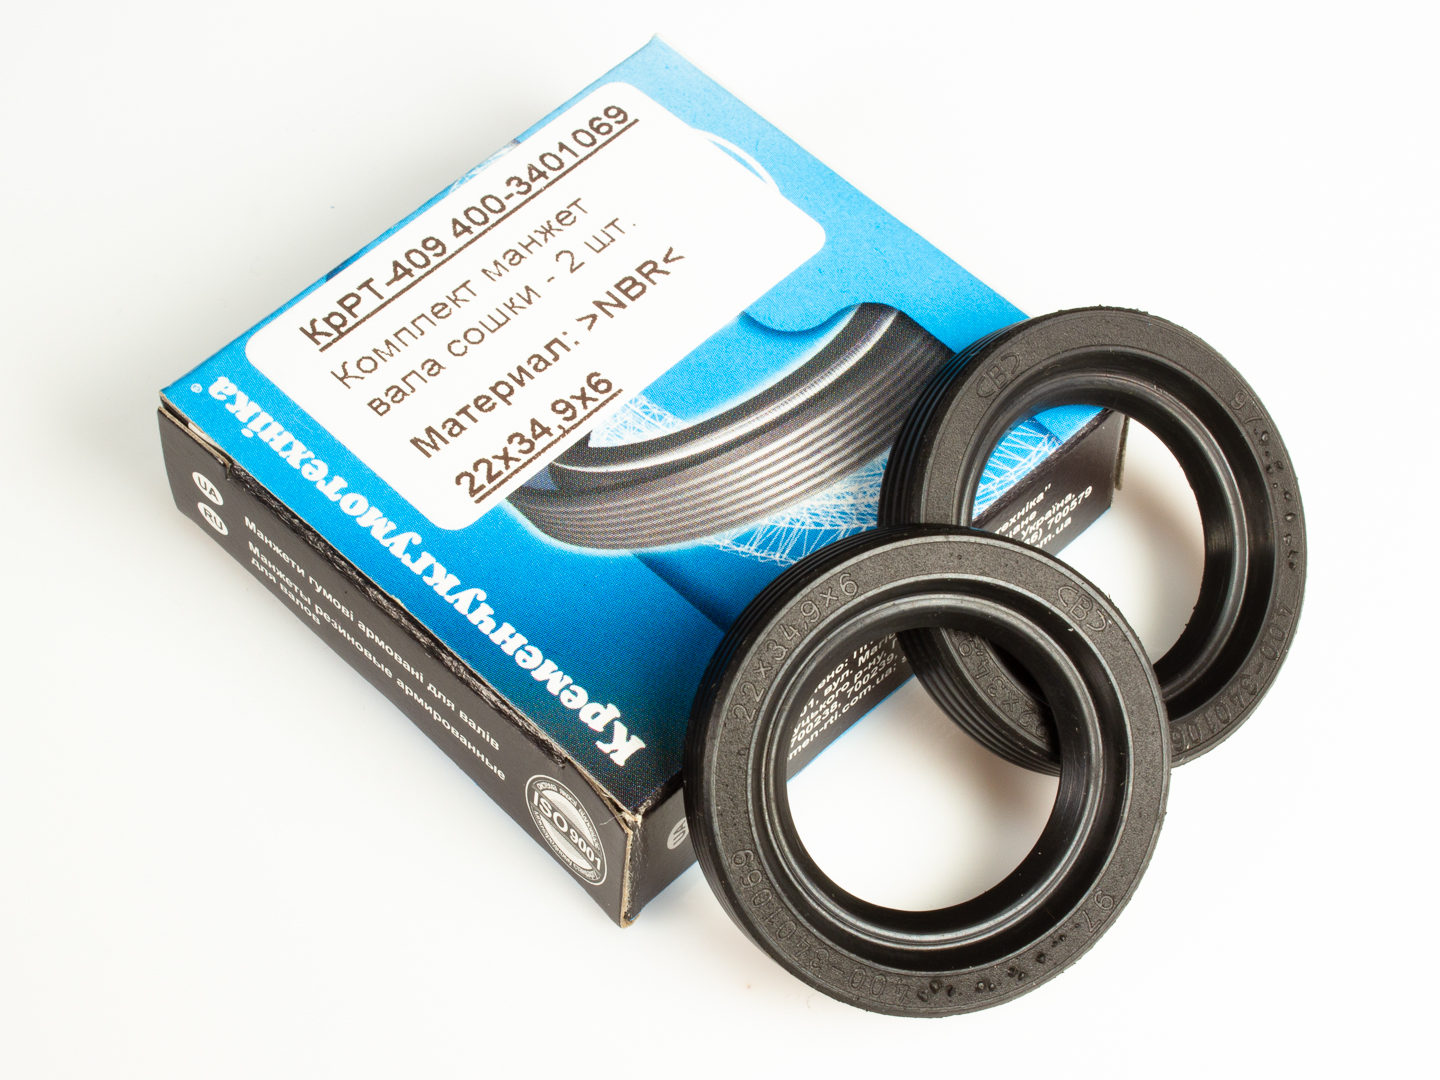 Rotary shaft oil seal 9 x 22 x pack height, model 